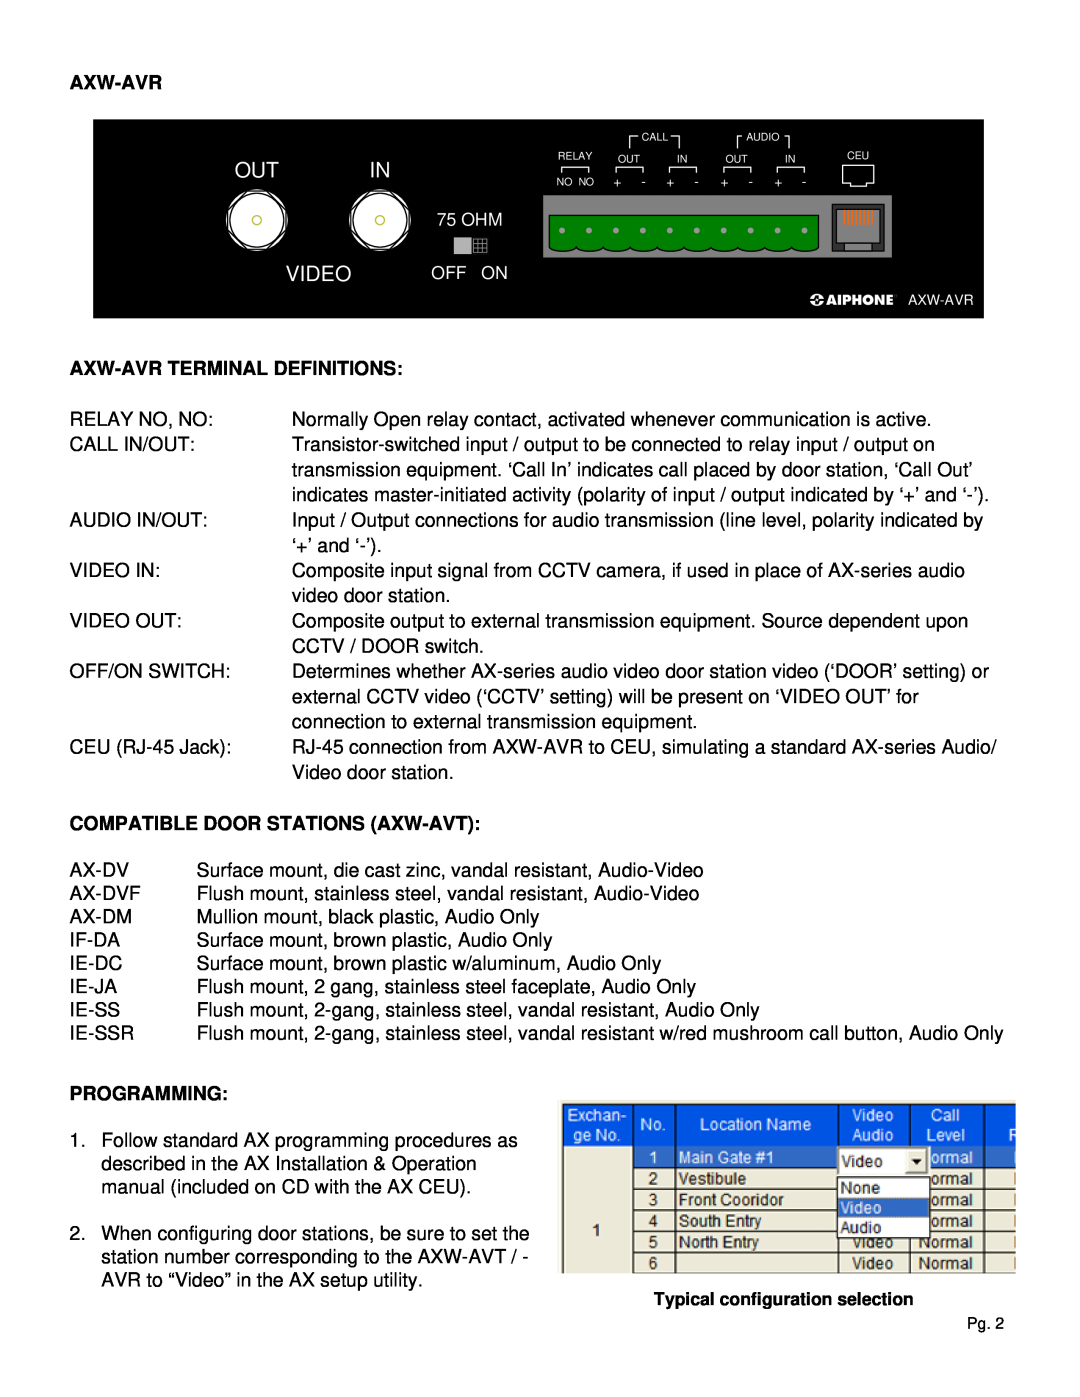 Aiphone AXW-AVT, AXW-AVR Out In, Video, Axw-Avrterminal Definitions, Compatible Door Stations Axw-Avt, Programming 